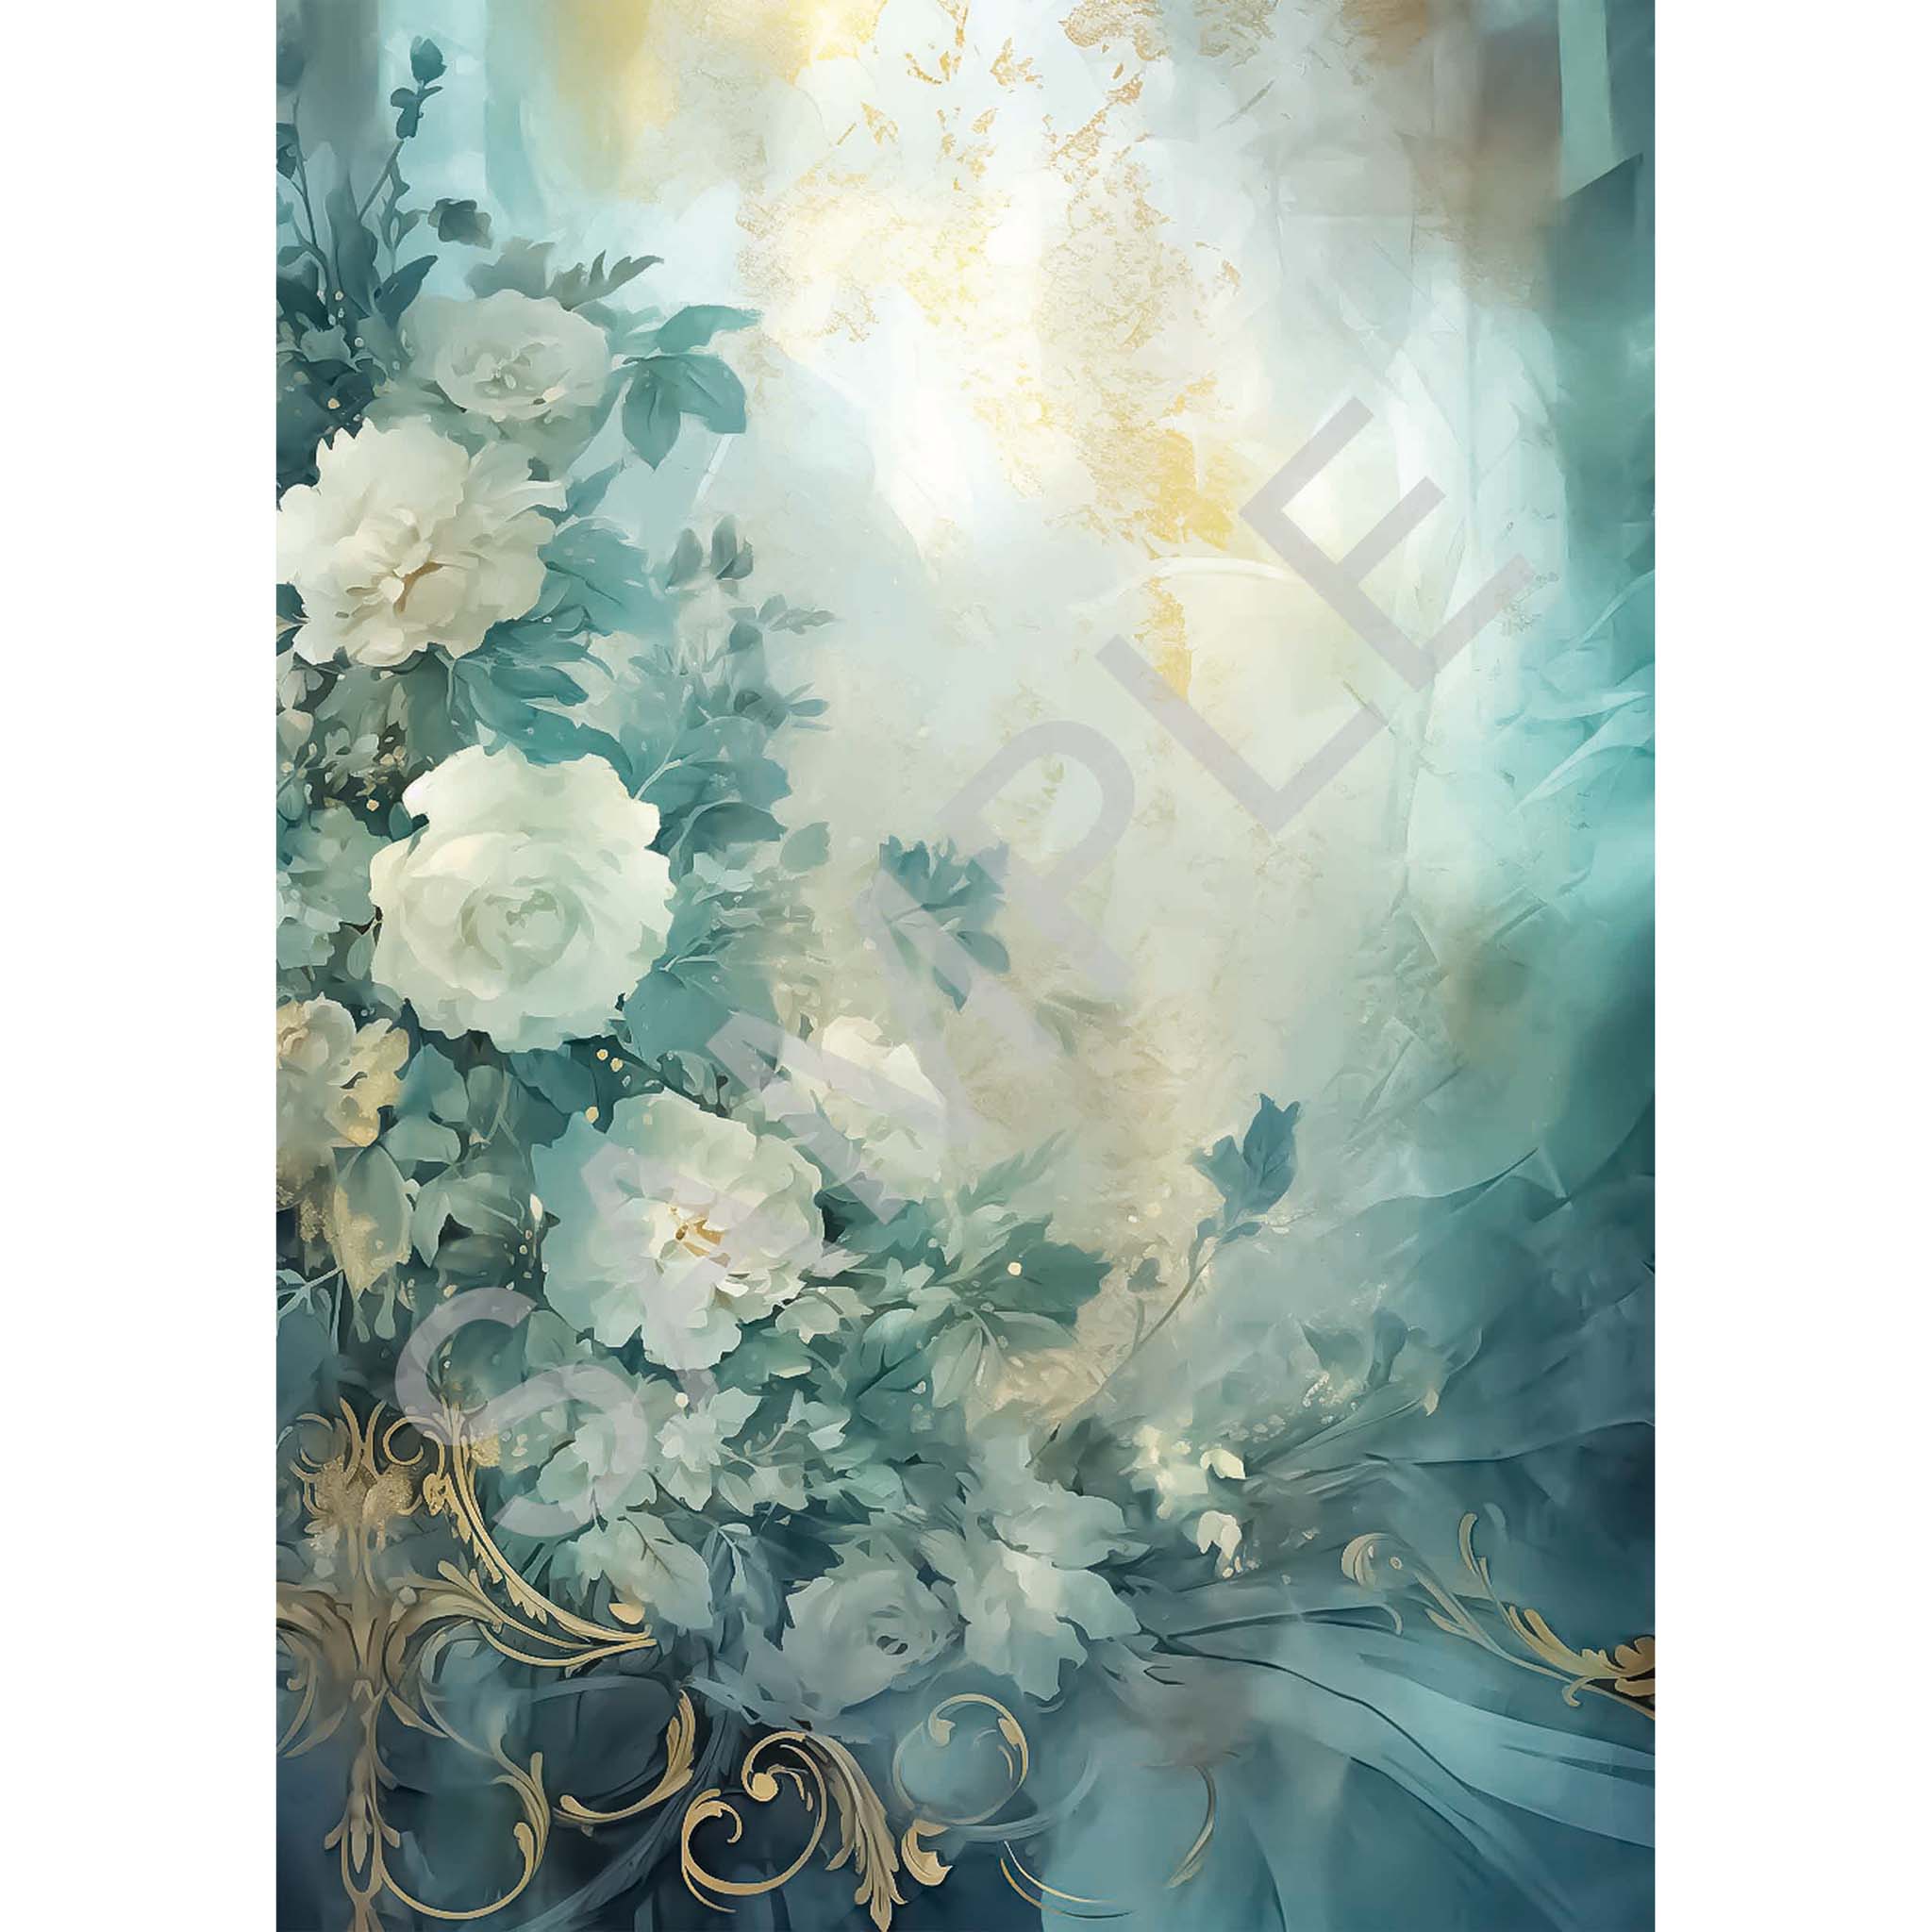 A4 rice paper design featuring a lush plant with creamy white flowers against a pastel blue backdrop White borders are on the sides.